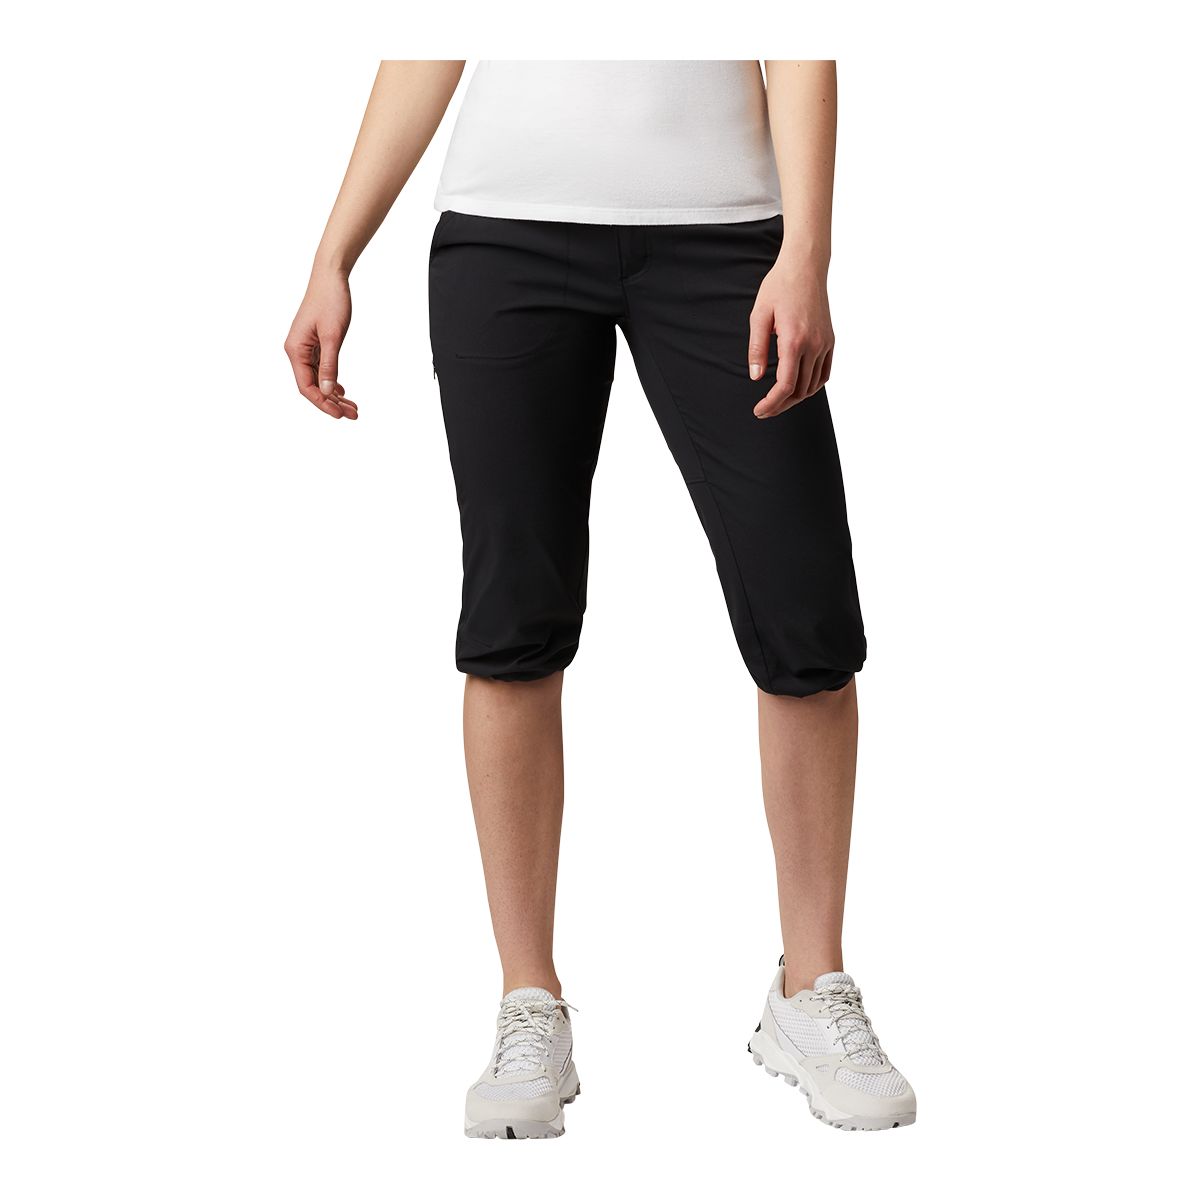 https://media-www.atmosphere.ca/product/div-03-softgoods/dpt-72-casual-clothing/sdpt-02-womens/334032556/columbia-women-s-saturday-trail-ii-knee-pants-4c3a70b5-87c4-454a-9474-384a6d32b2a2-jpgrendition.jpg